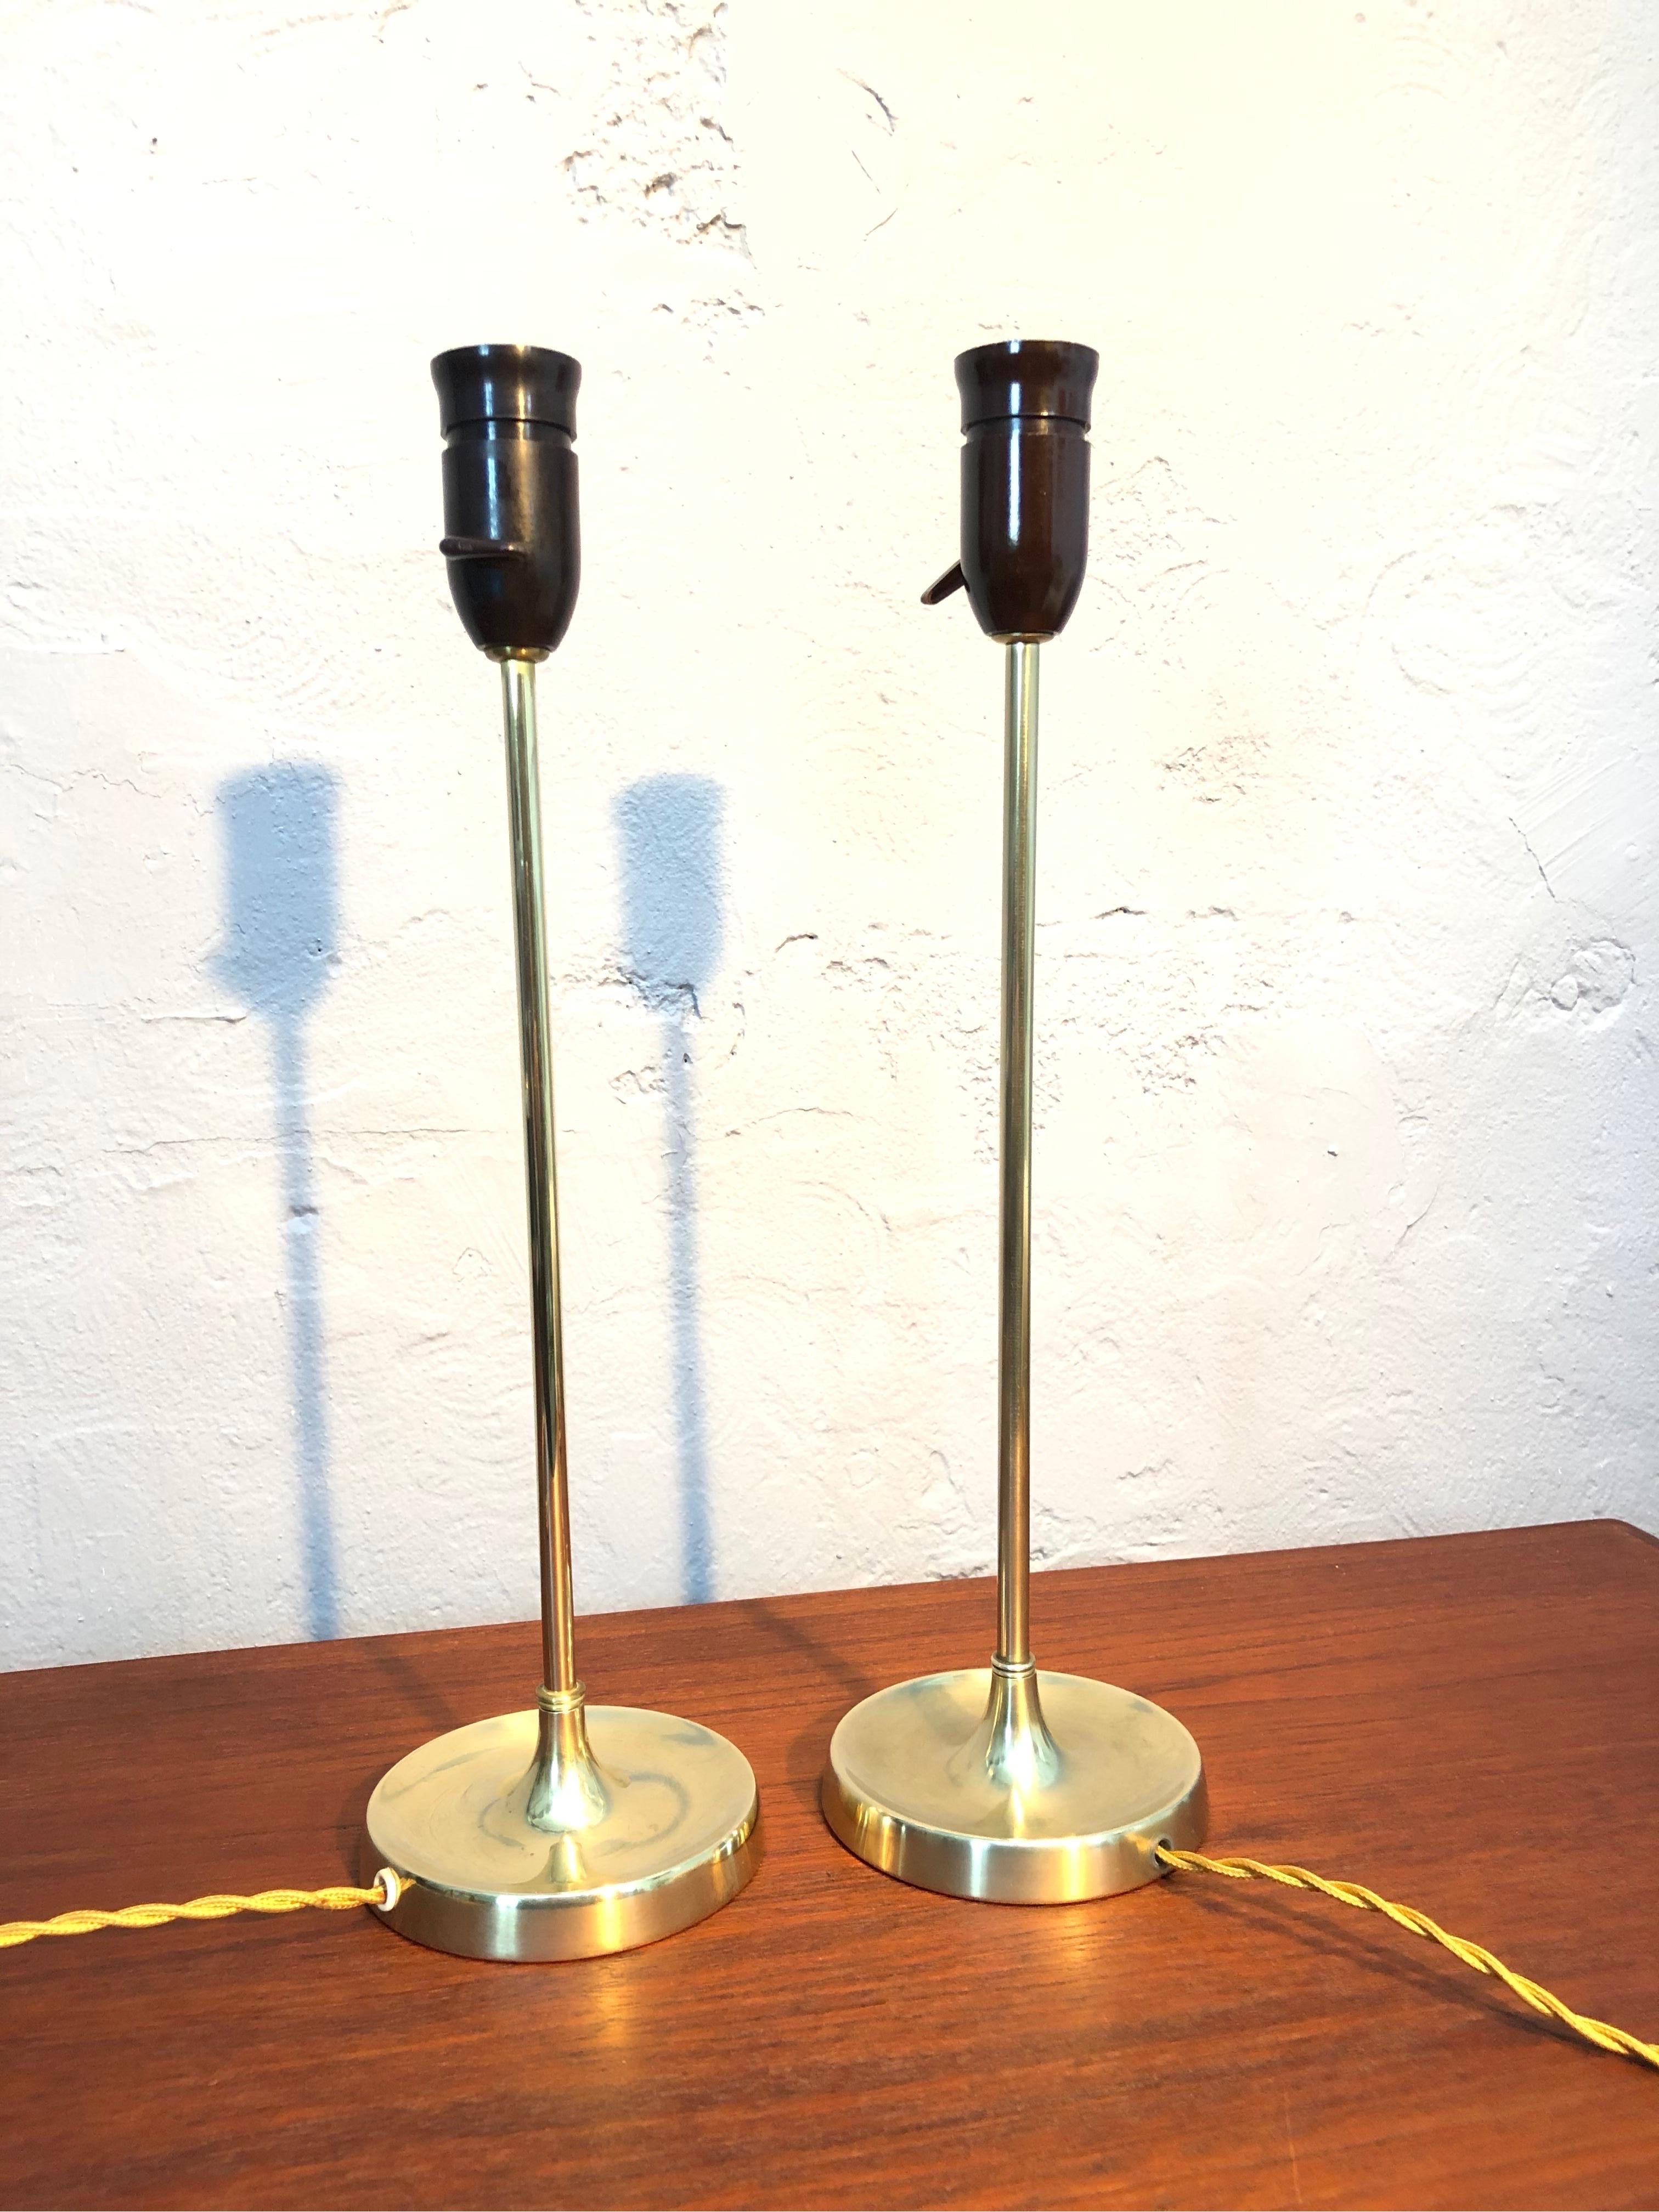 Mid-20th Century Vintage Pair of Brass Table Lamps by Esben Klint for Le Klint from the 1950s